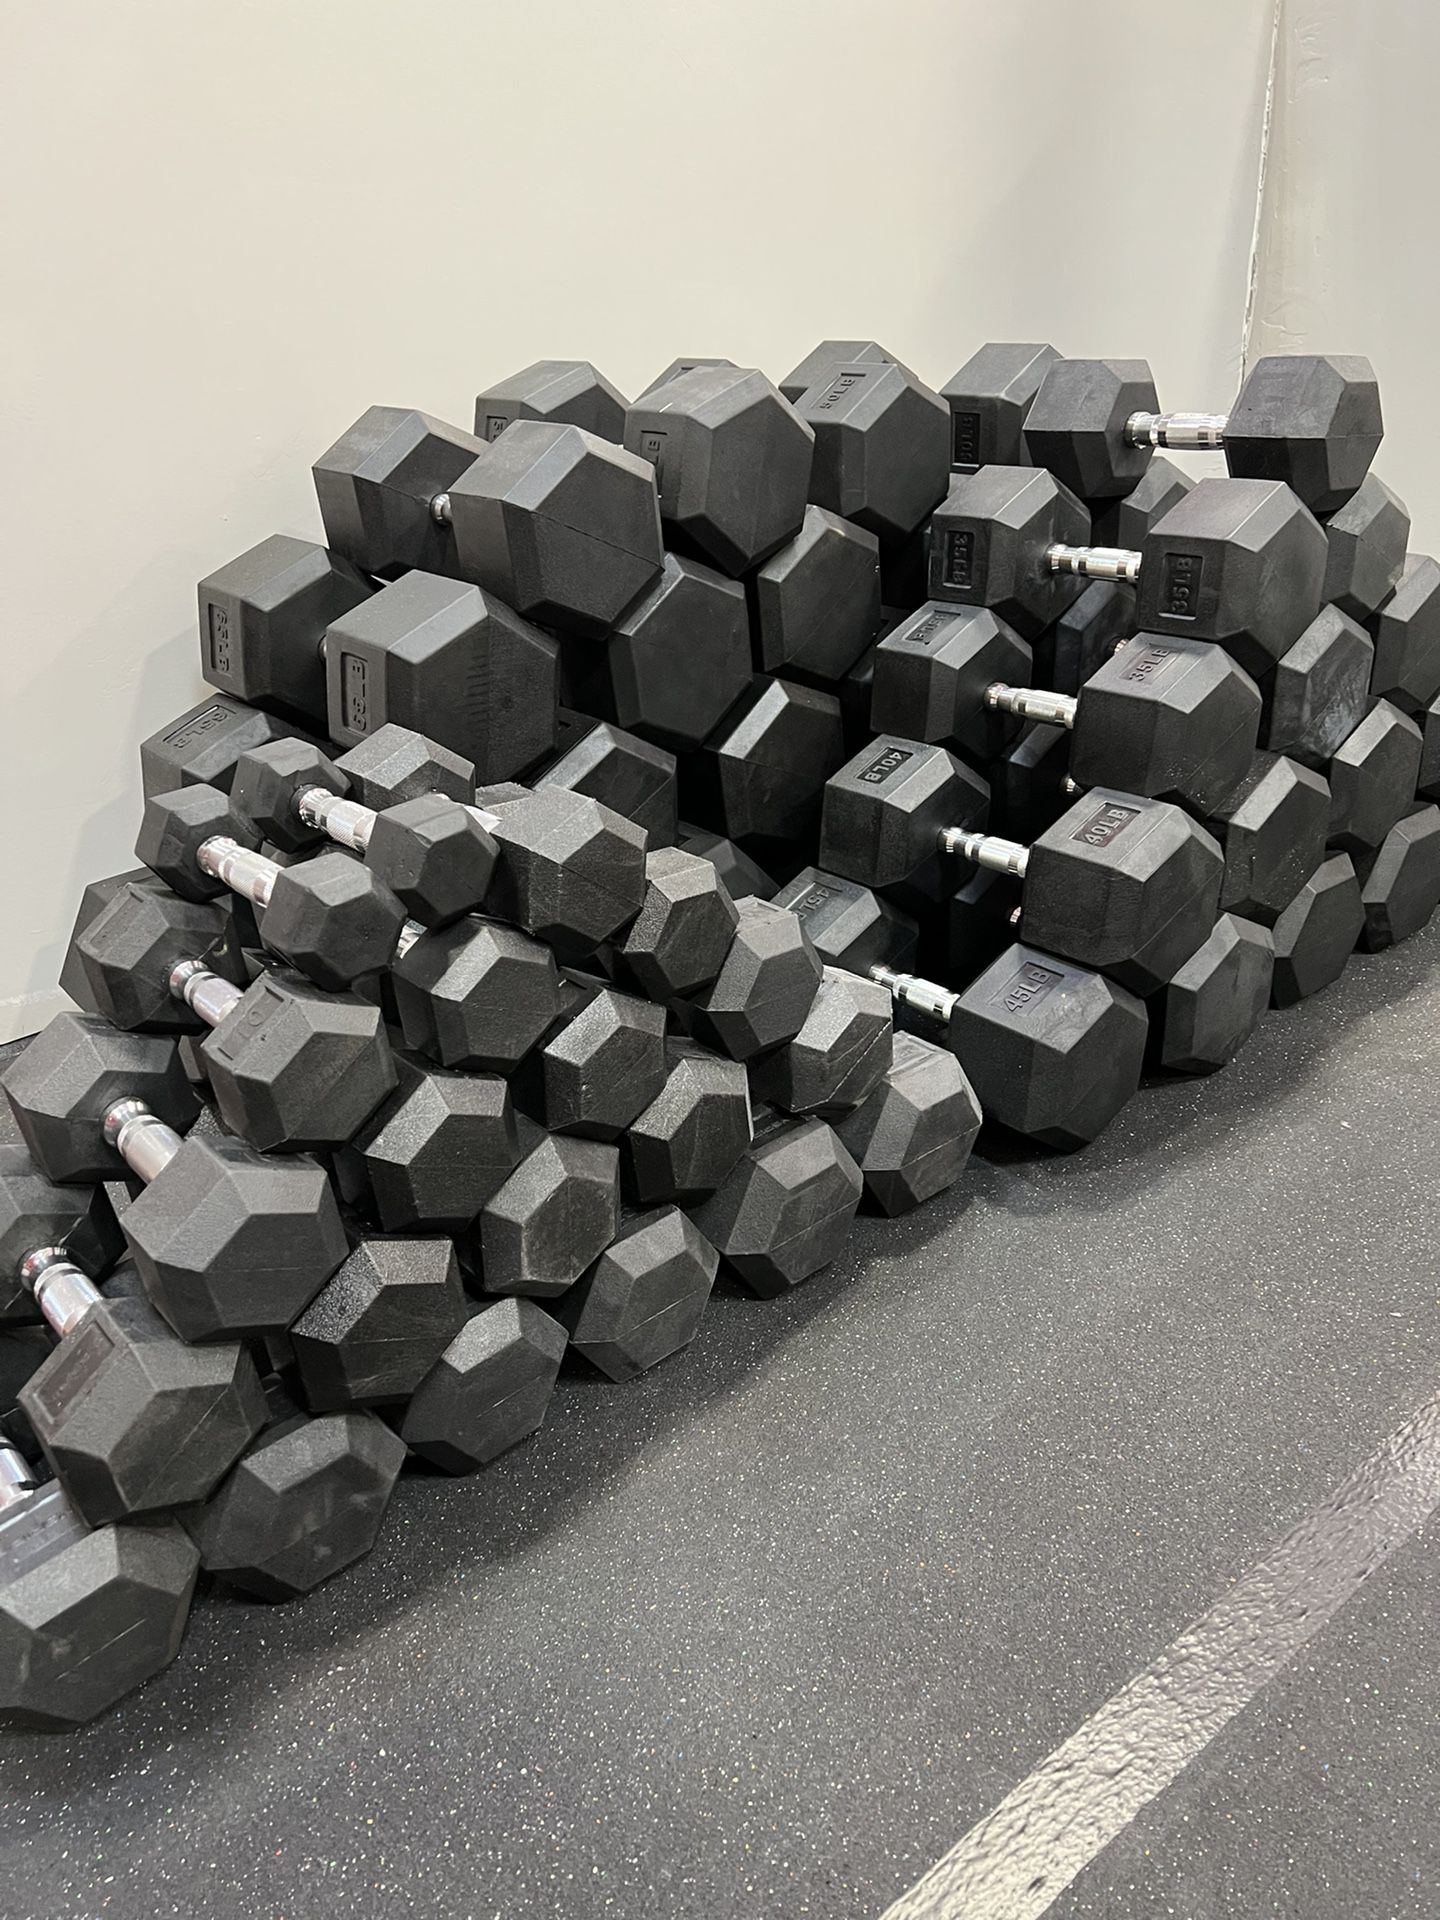 New 5-100 Rubber Dumbbell Sets + Delivery Available